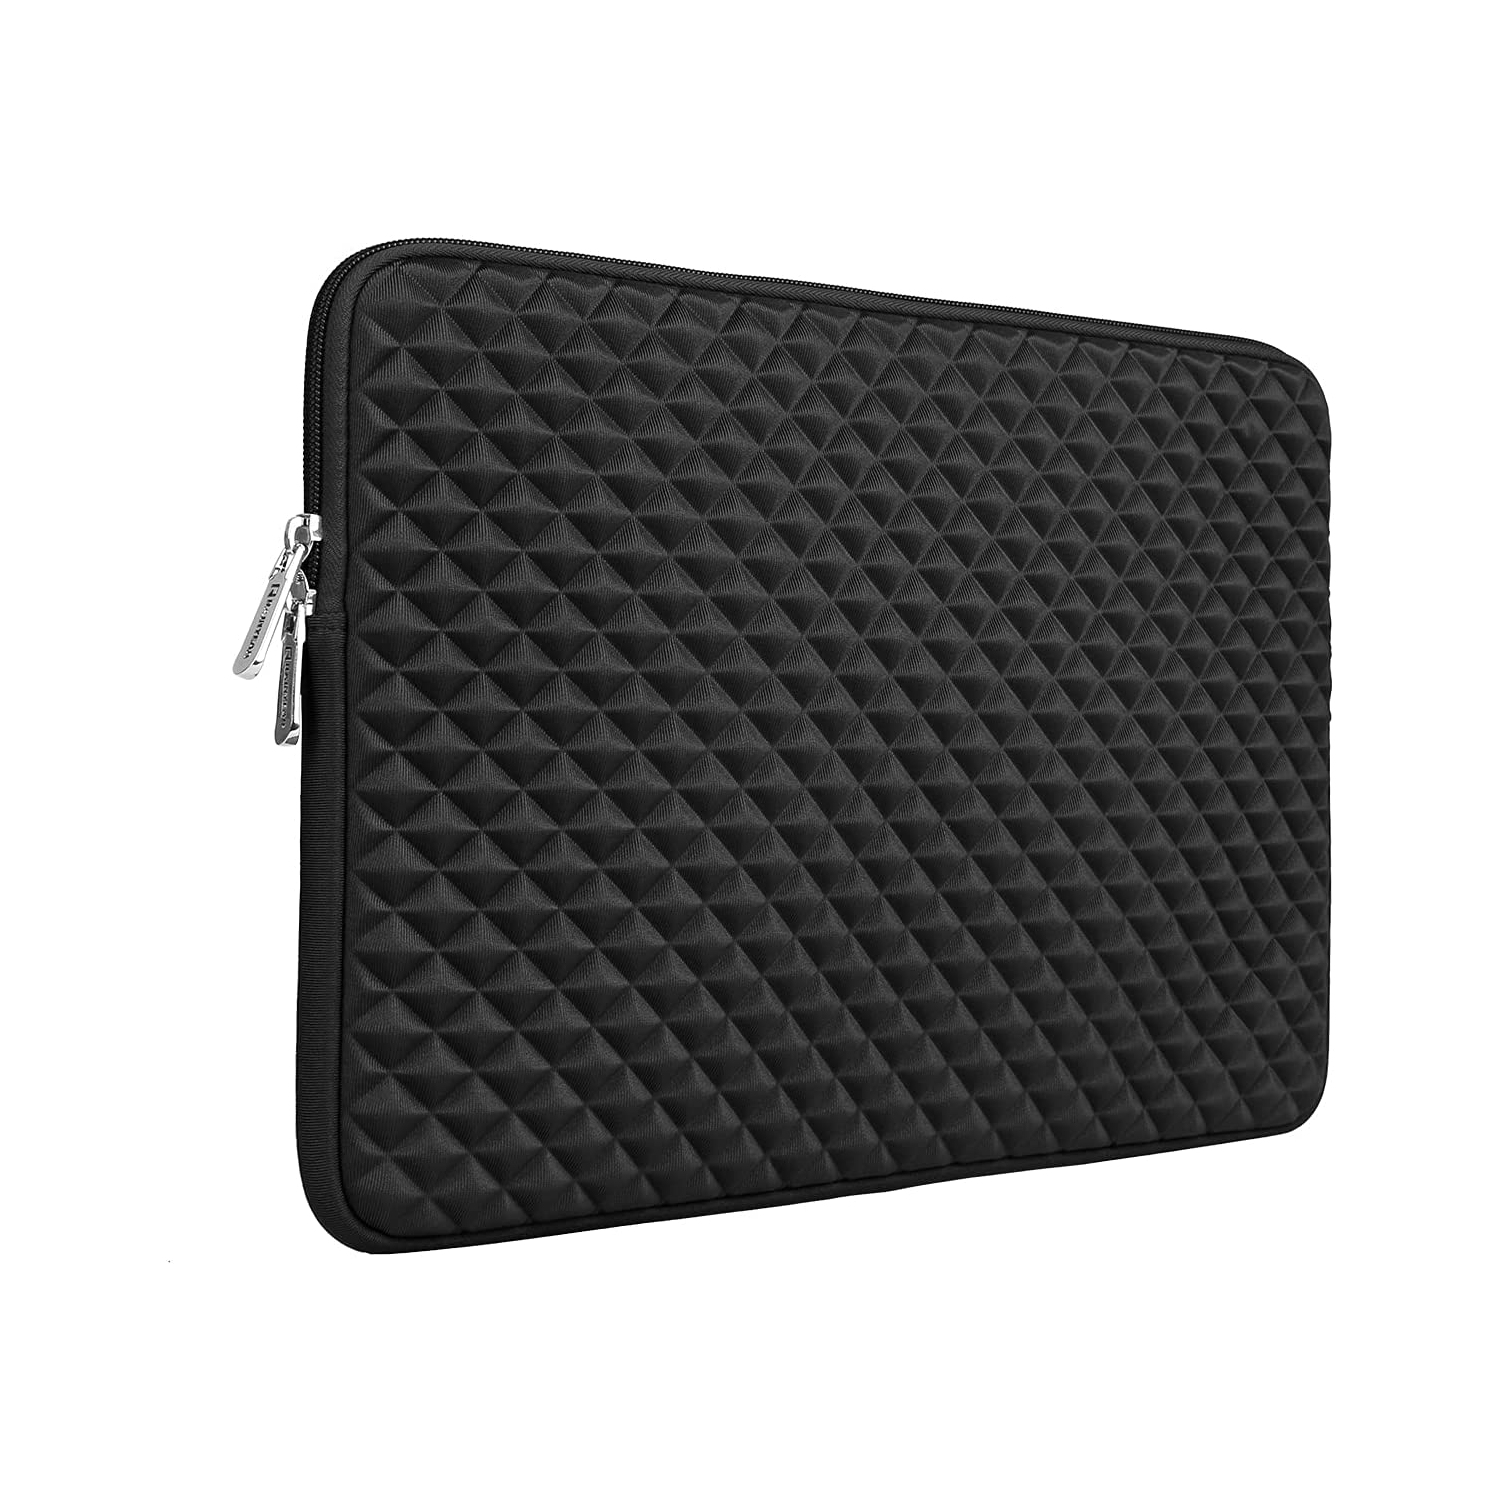 15.6 Inch Laptop Sleeve Diamond Foam Shock Resistant Protective Case Cover Carrying Bag Compatible with 15.6"